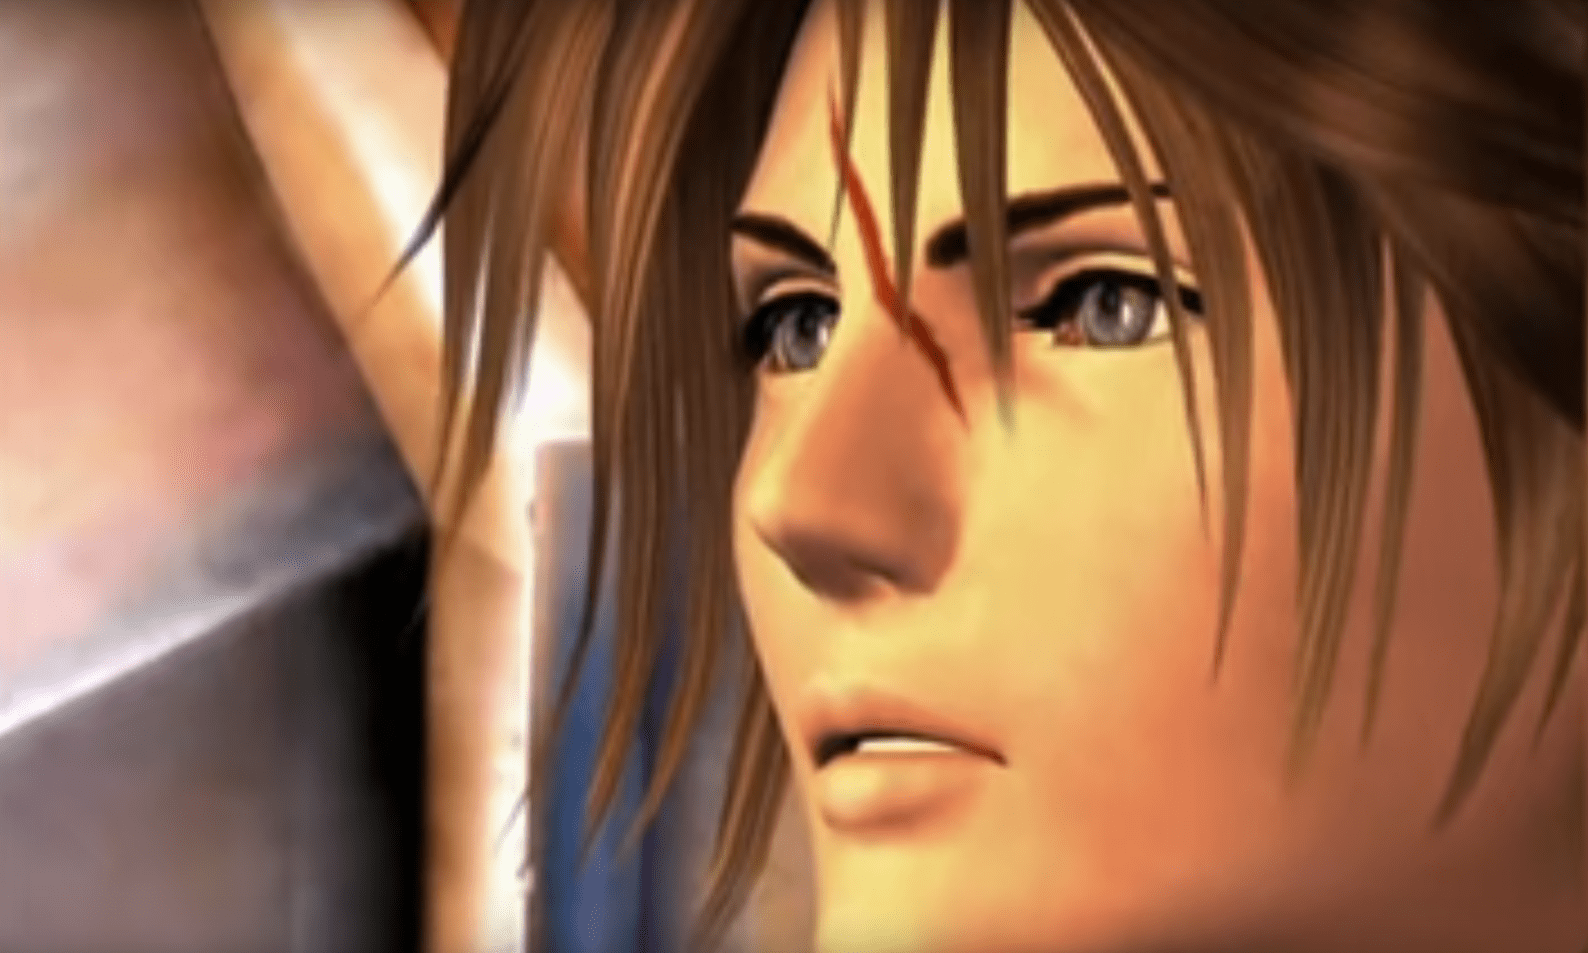 Final Fantasy 7 And Final Fantasy 8 Coming As A Twin Pack To Nintendo Switch, FF8 Remastered To PS4